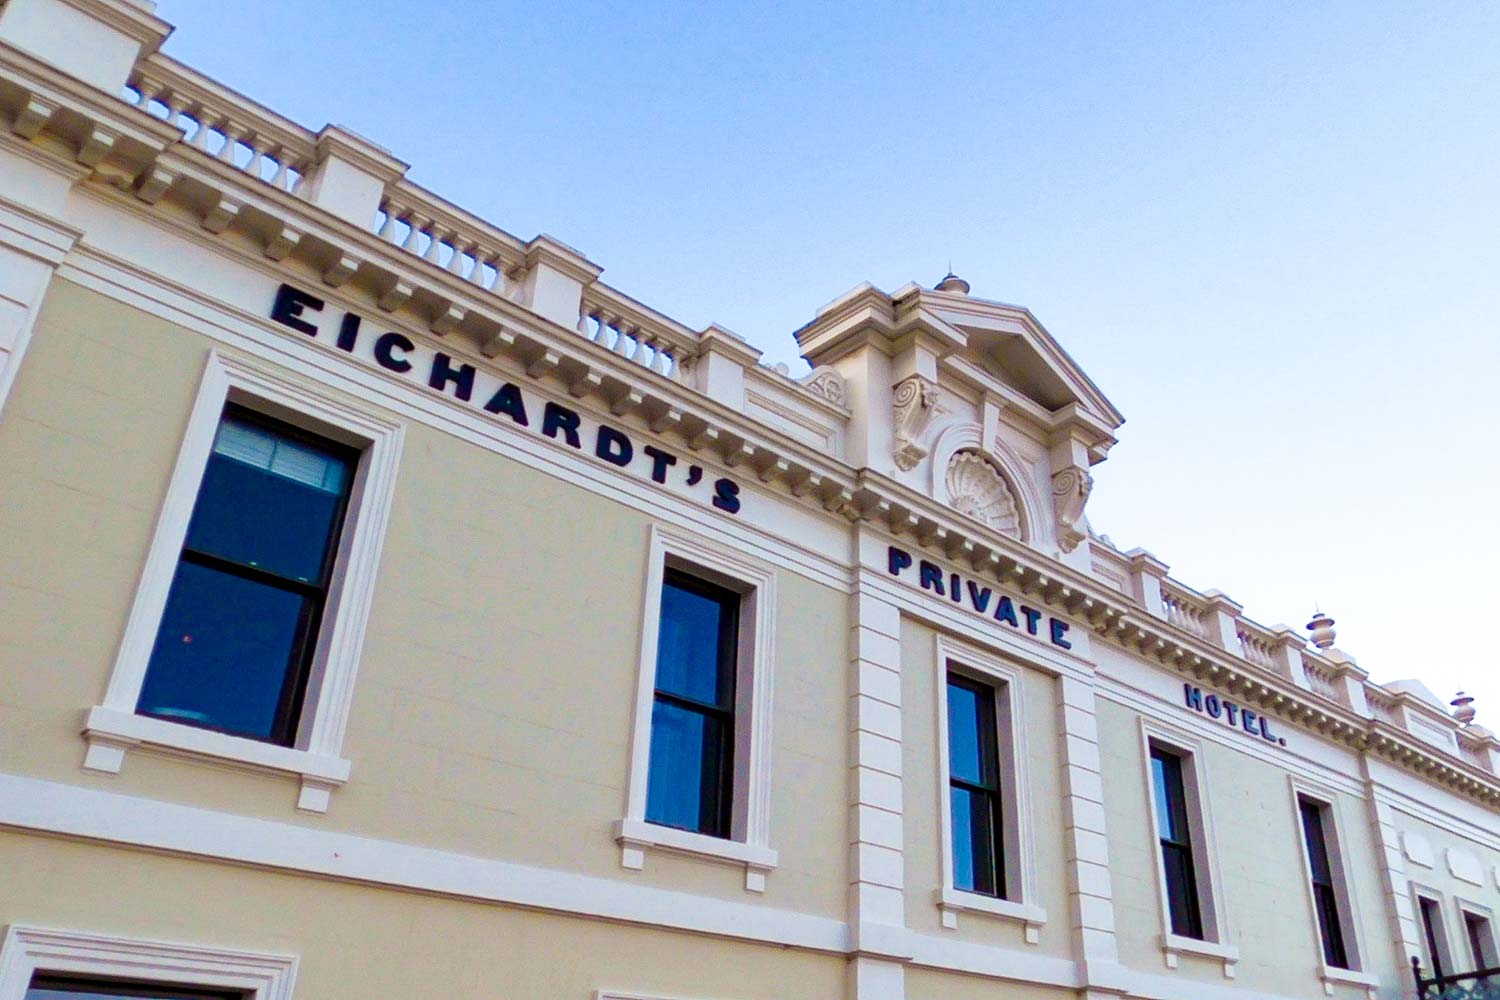 Colonial Era Facade with Eichardt's Private Hotel in bold black letters